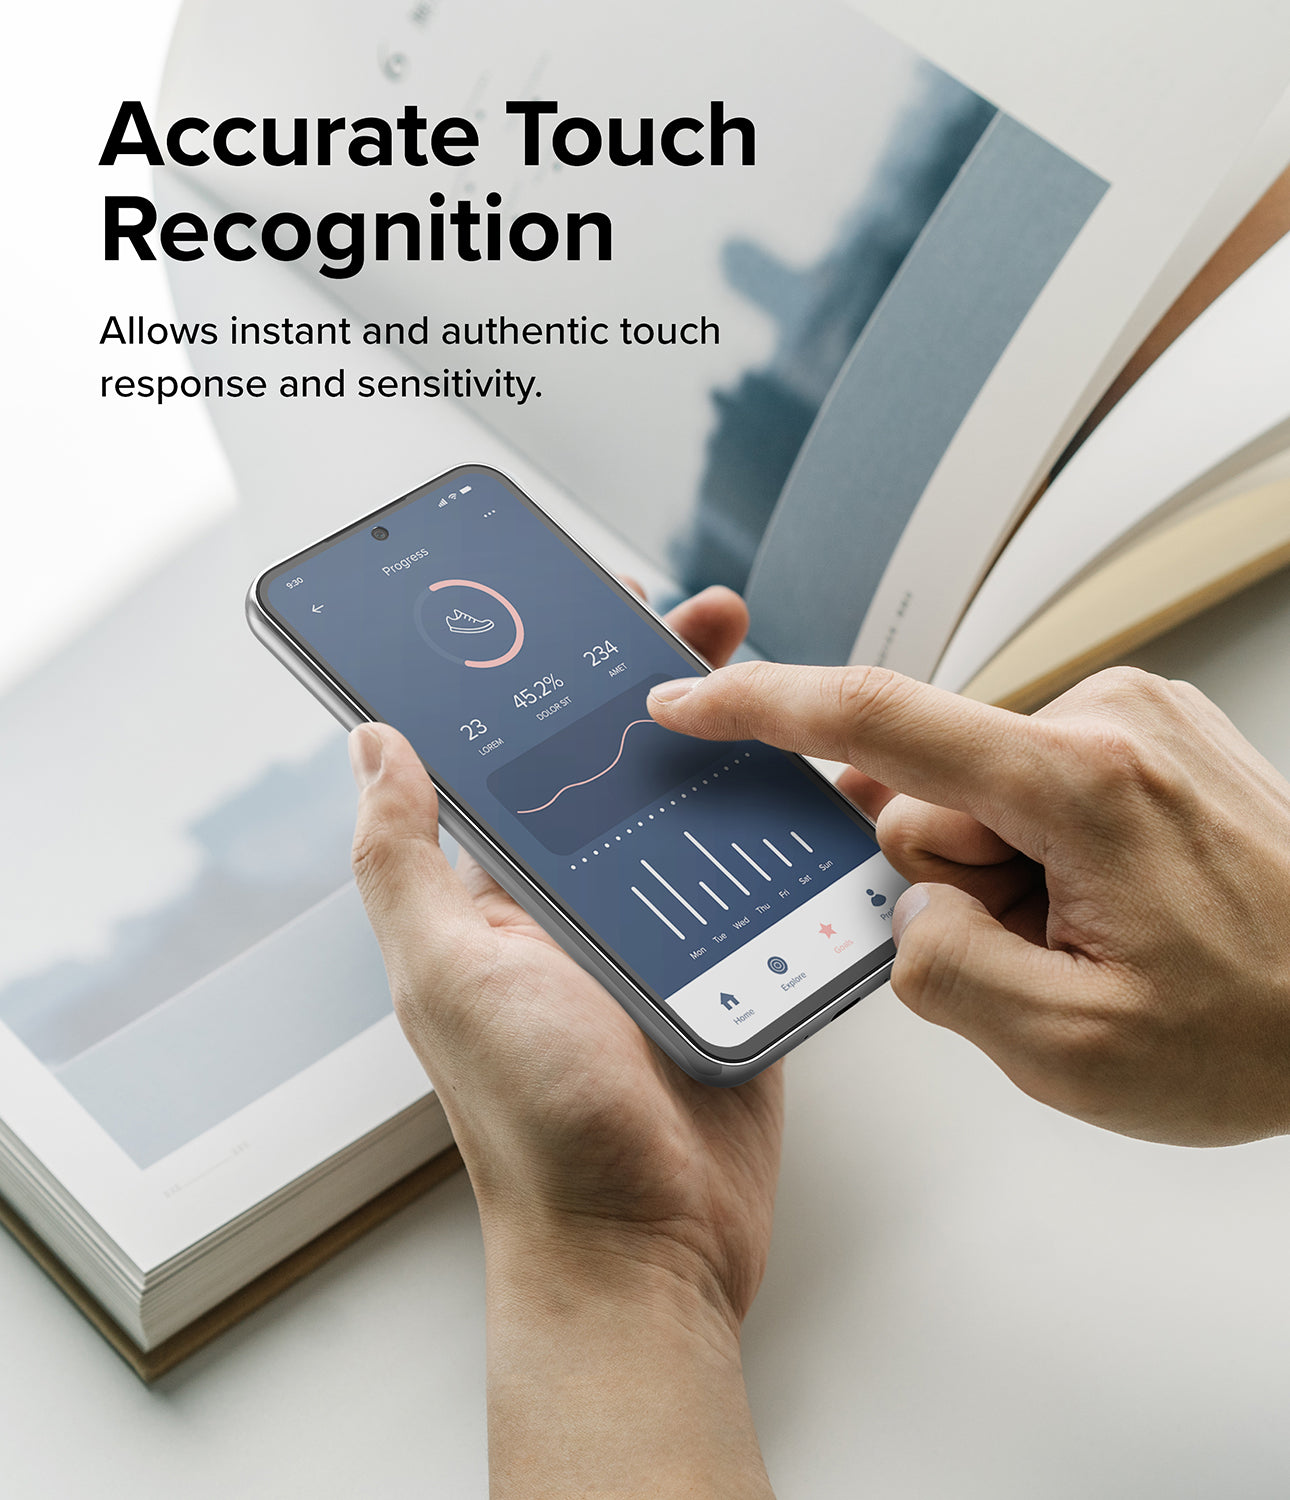 Accurate Touch Recognition - Allows instant and authentic touch response and sensitivity.